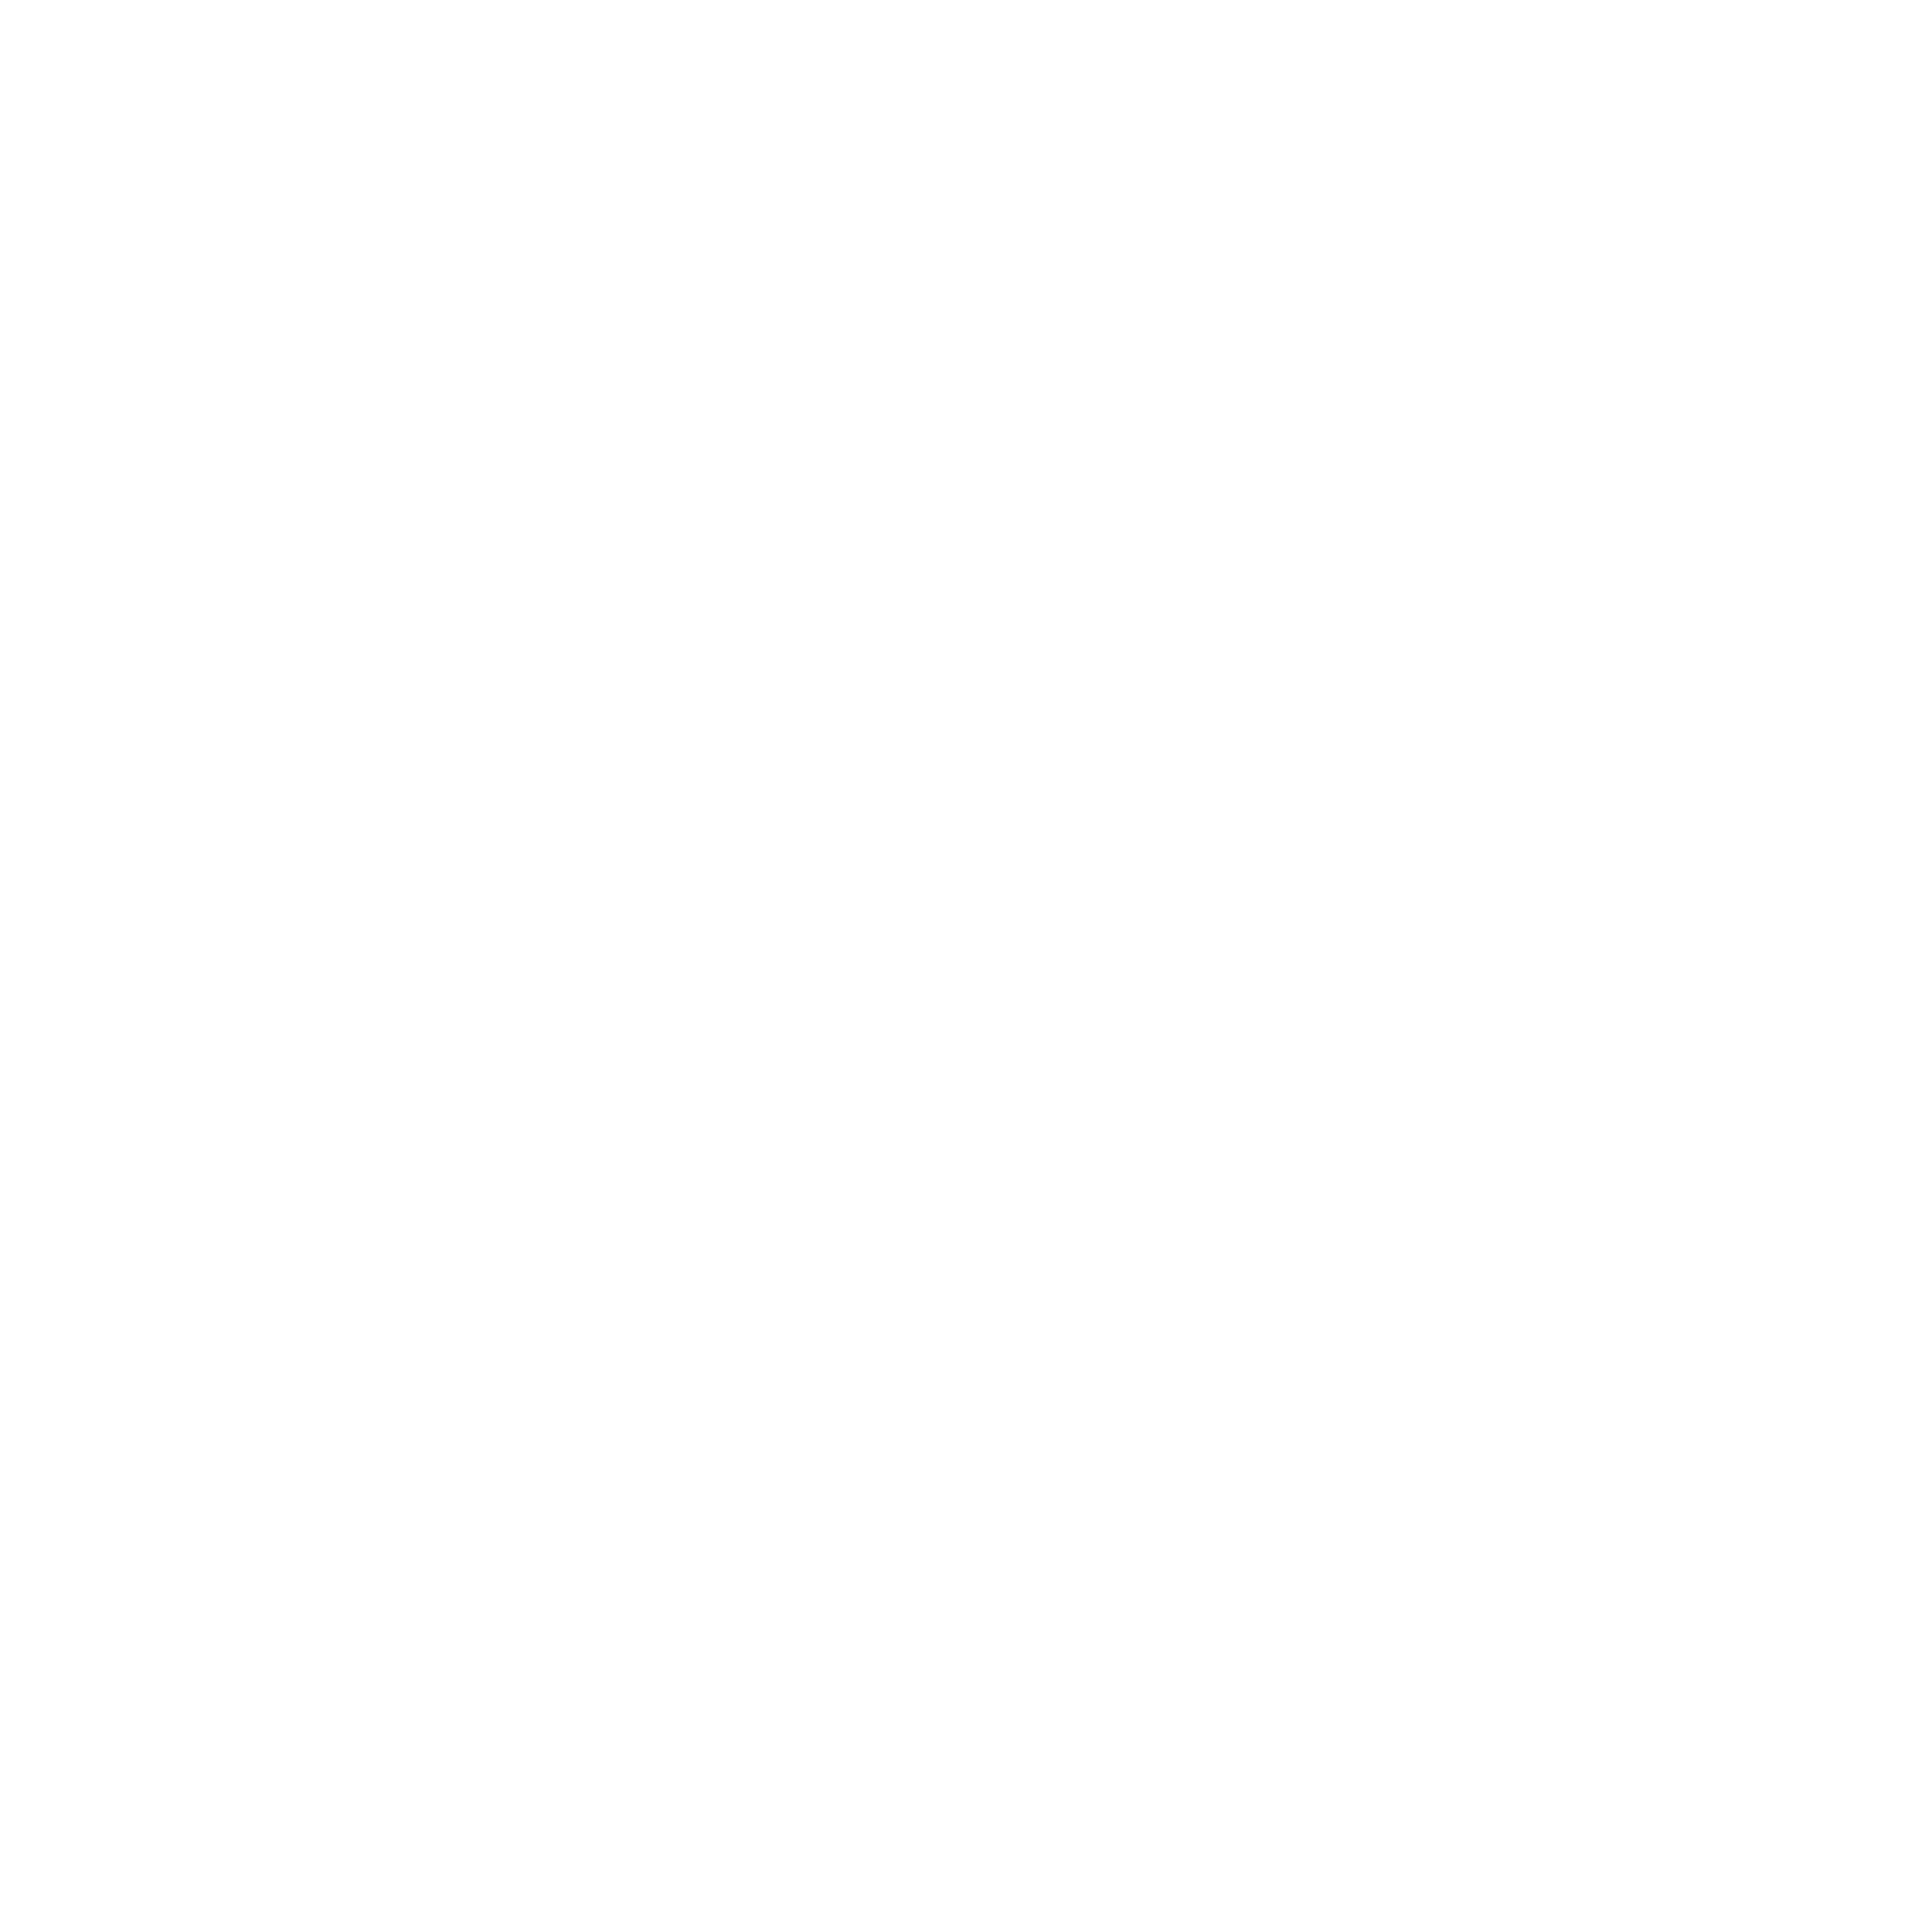 Earn an Executive Coaching Certification by becoming certified in the Collective Leadership Assessment